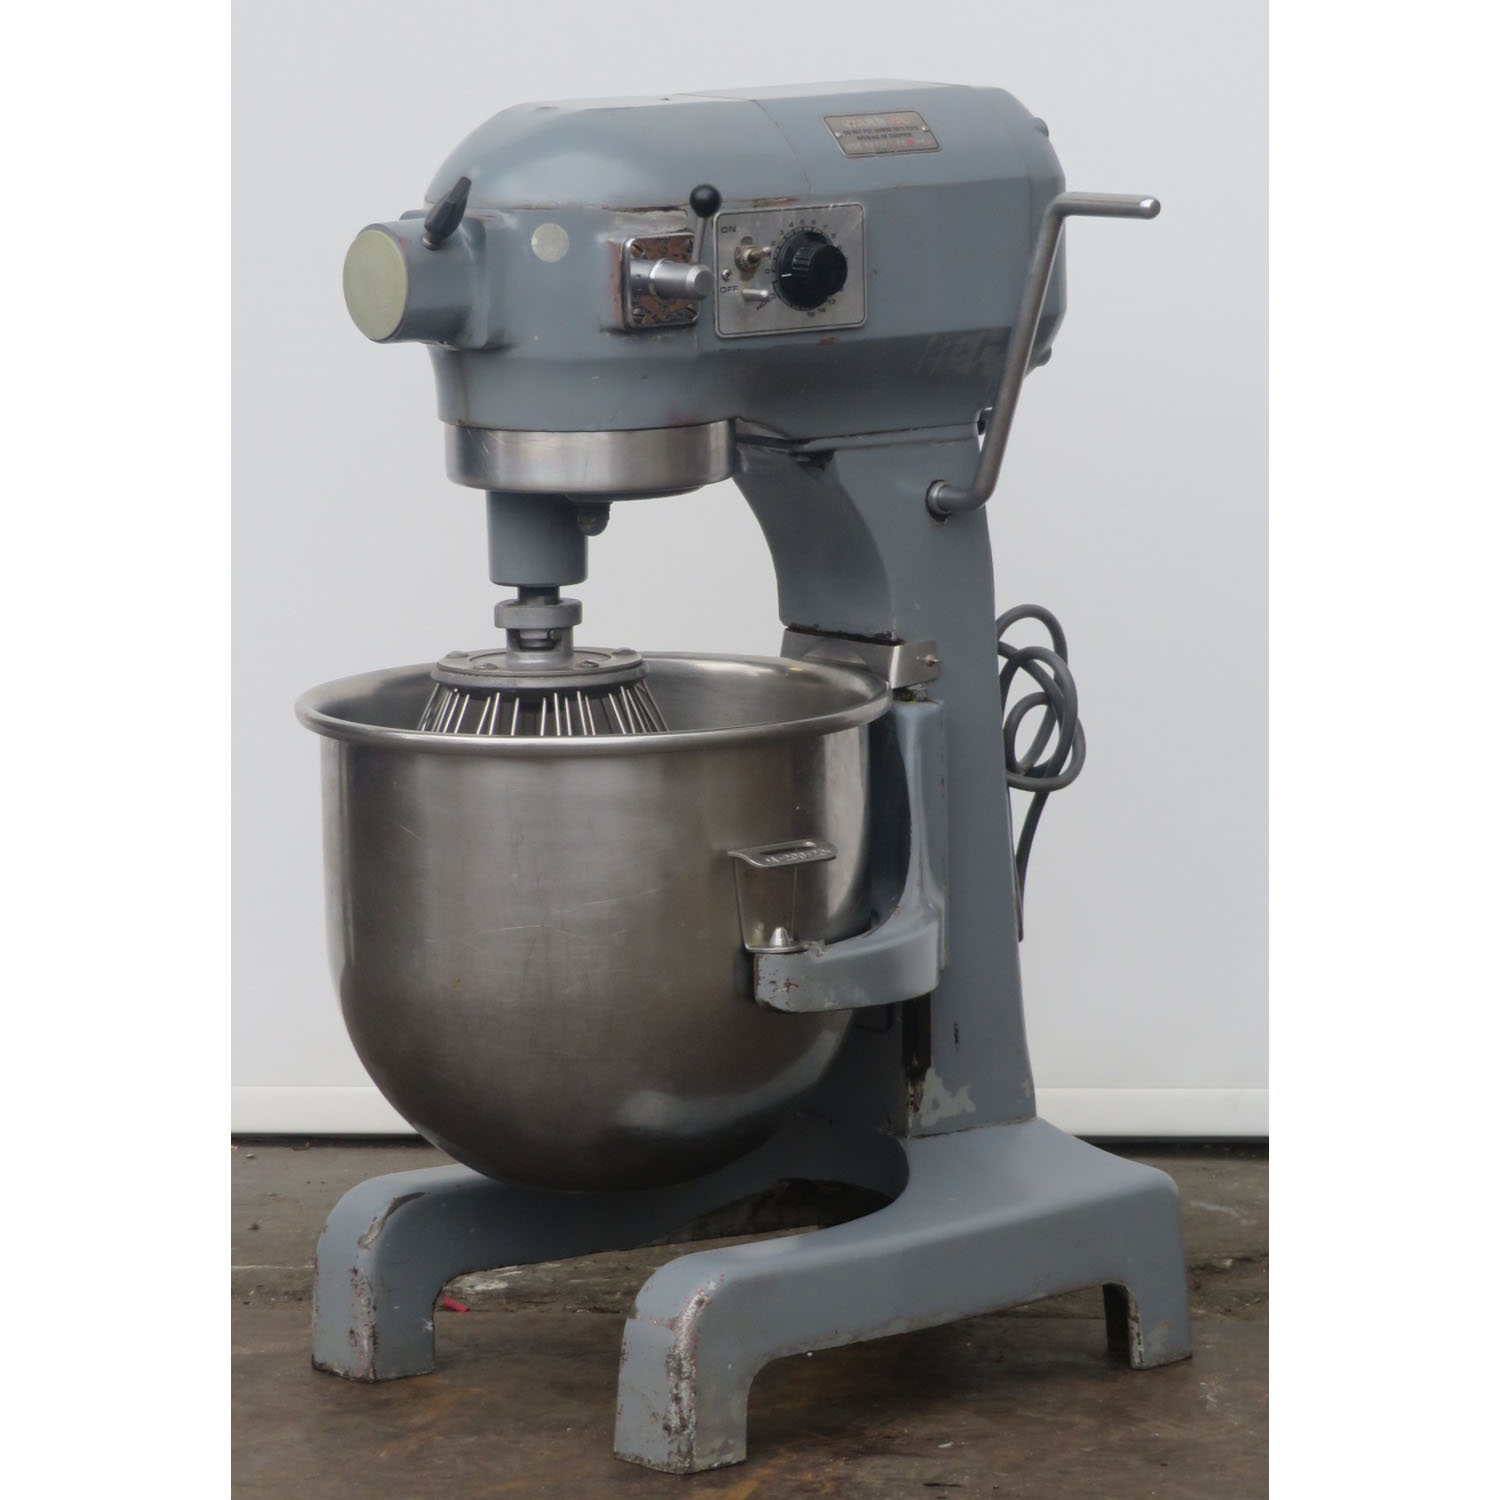 Hobart 20 Quart A200T Mixer, Used Great Condition